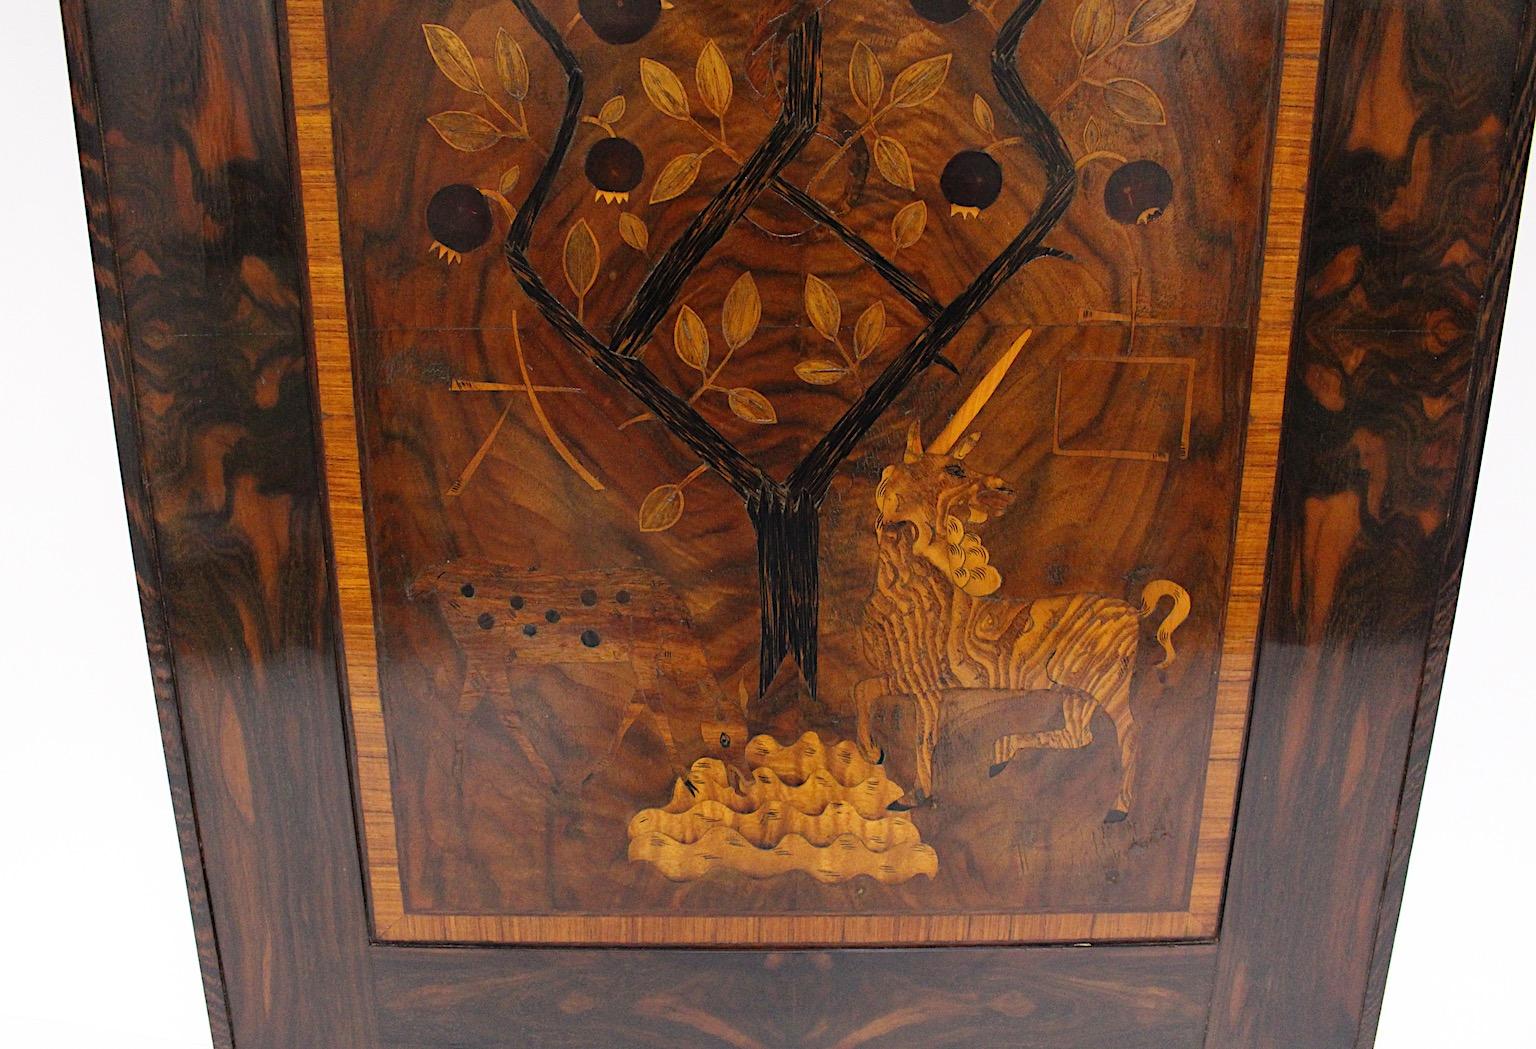 Art Deco Wood Inlaid Picture Unicorn Pomegranate Tree 1920s Style Victor Lurje For Sale 10